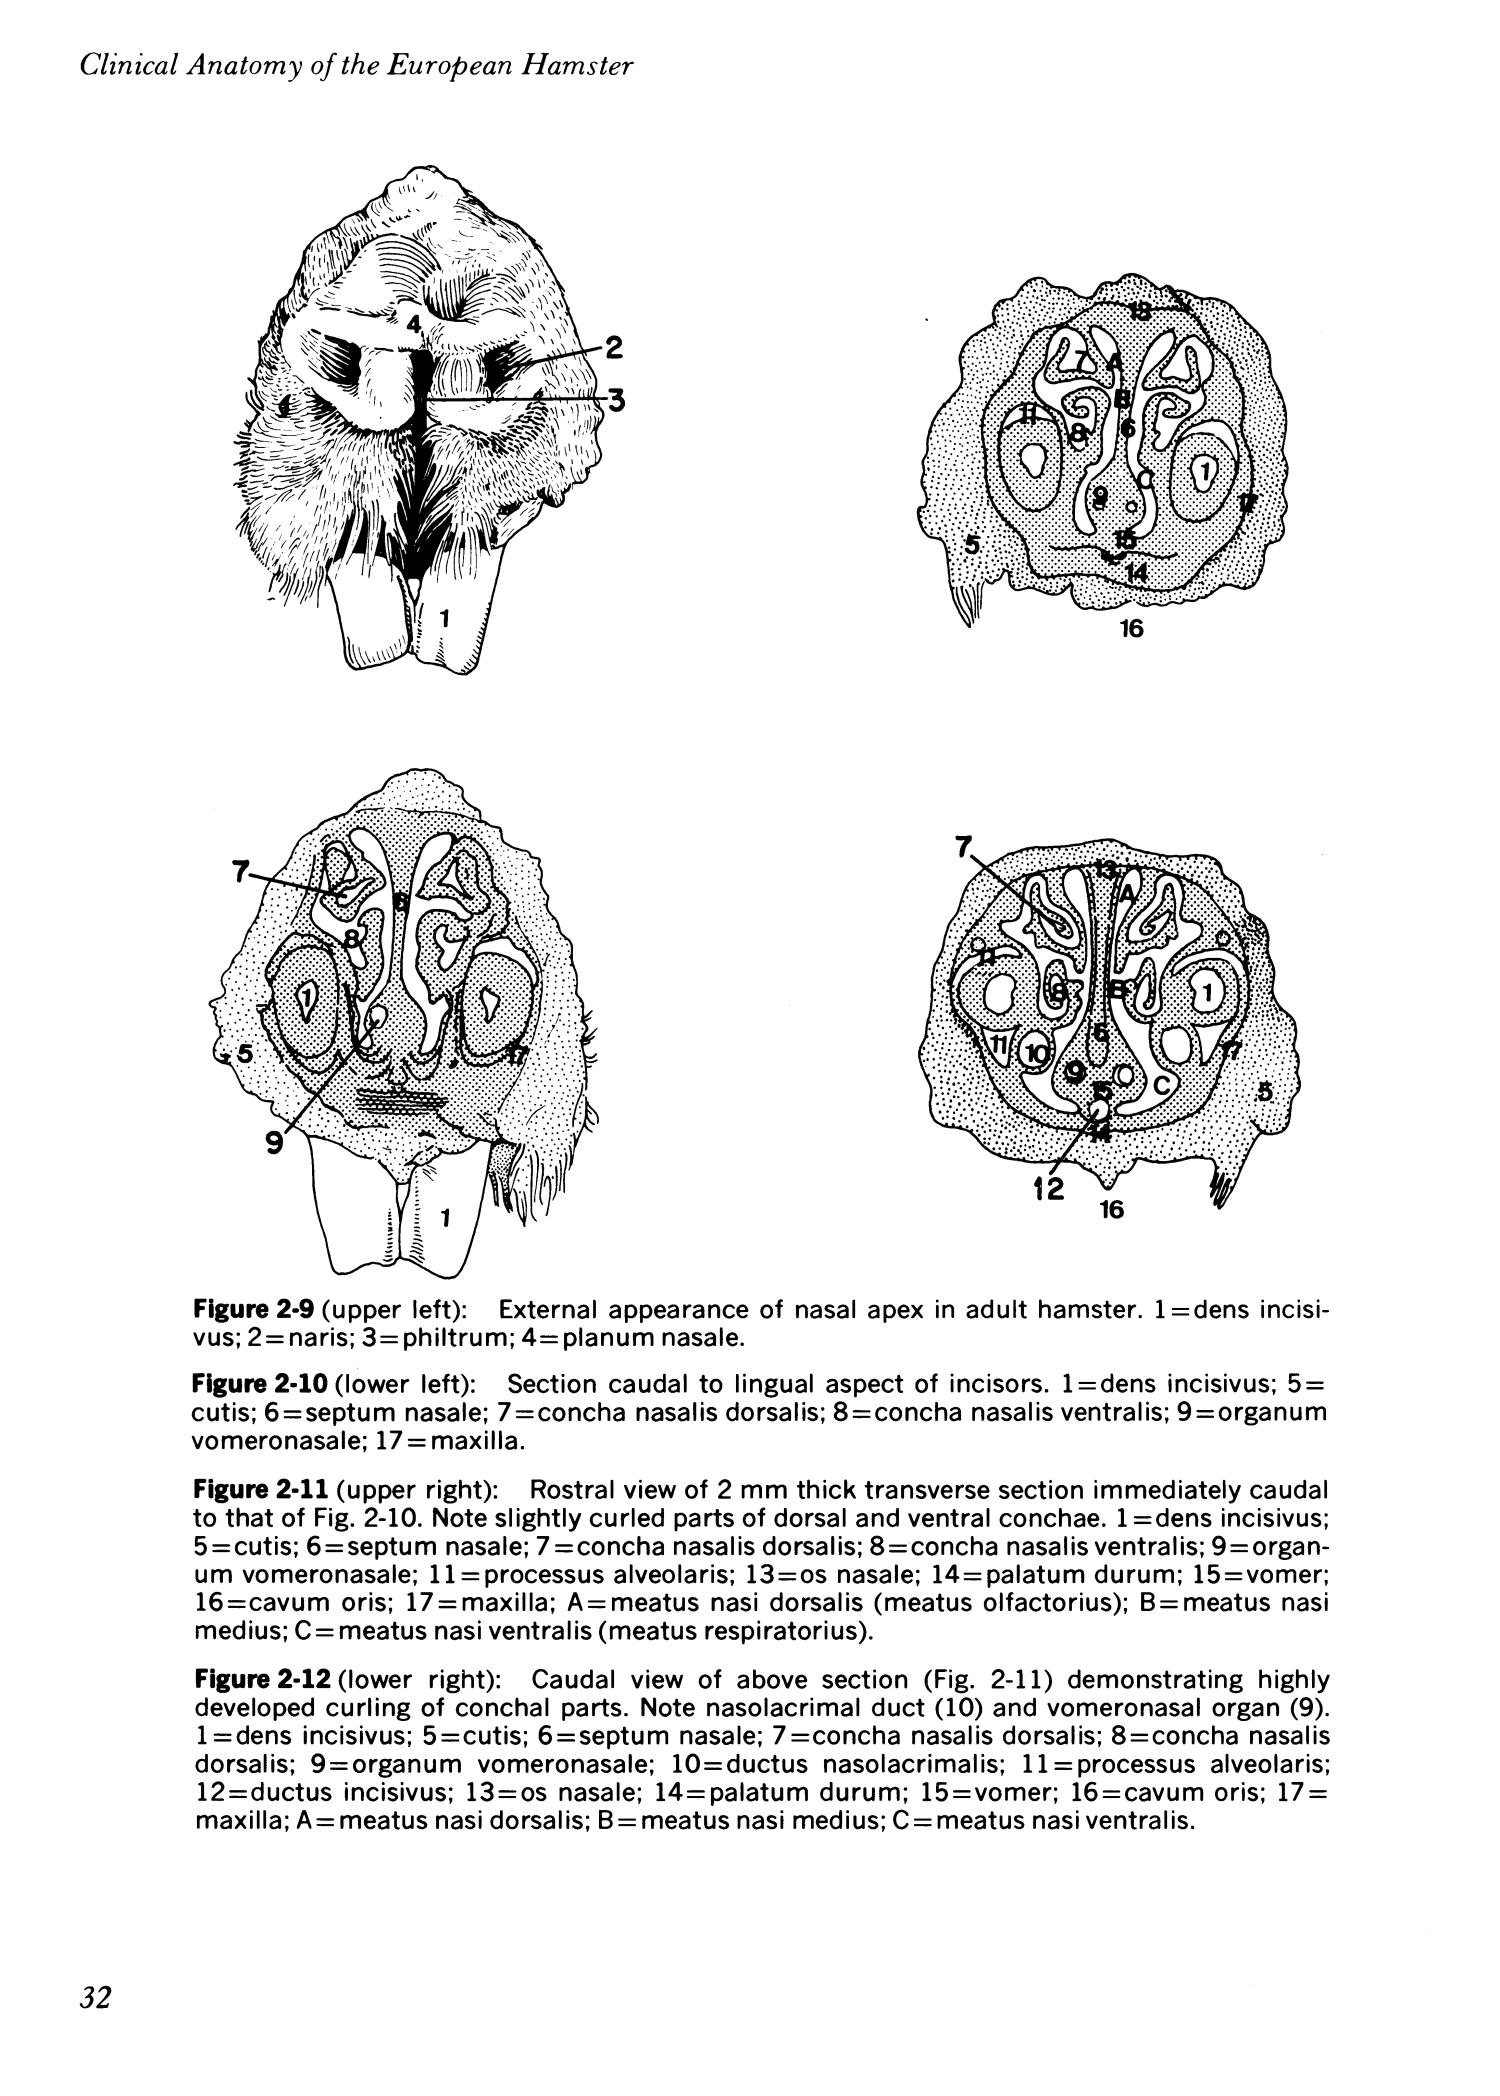 Clinical anatomy of the European hamster, Cricetus cricetus, L. - Page 44 -  UNT Digital Library